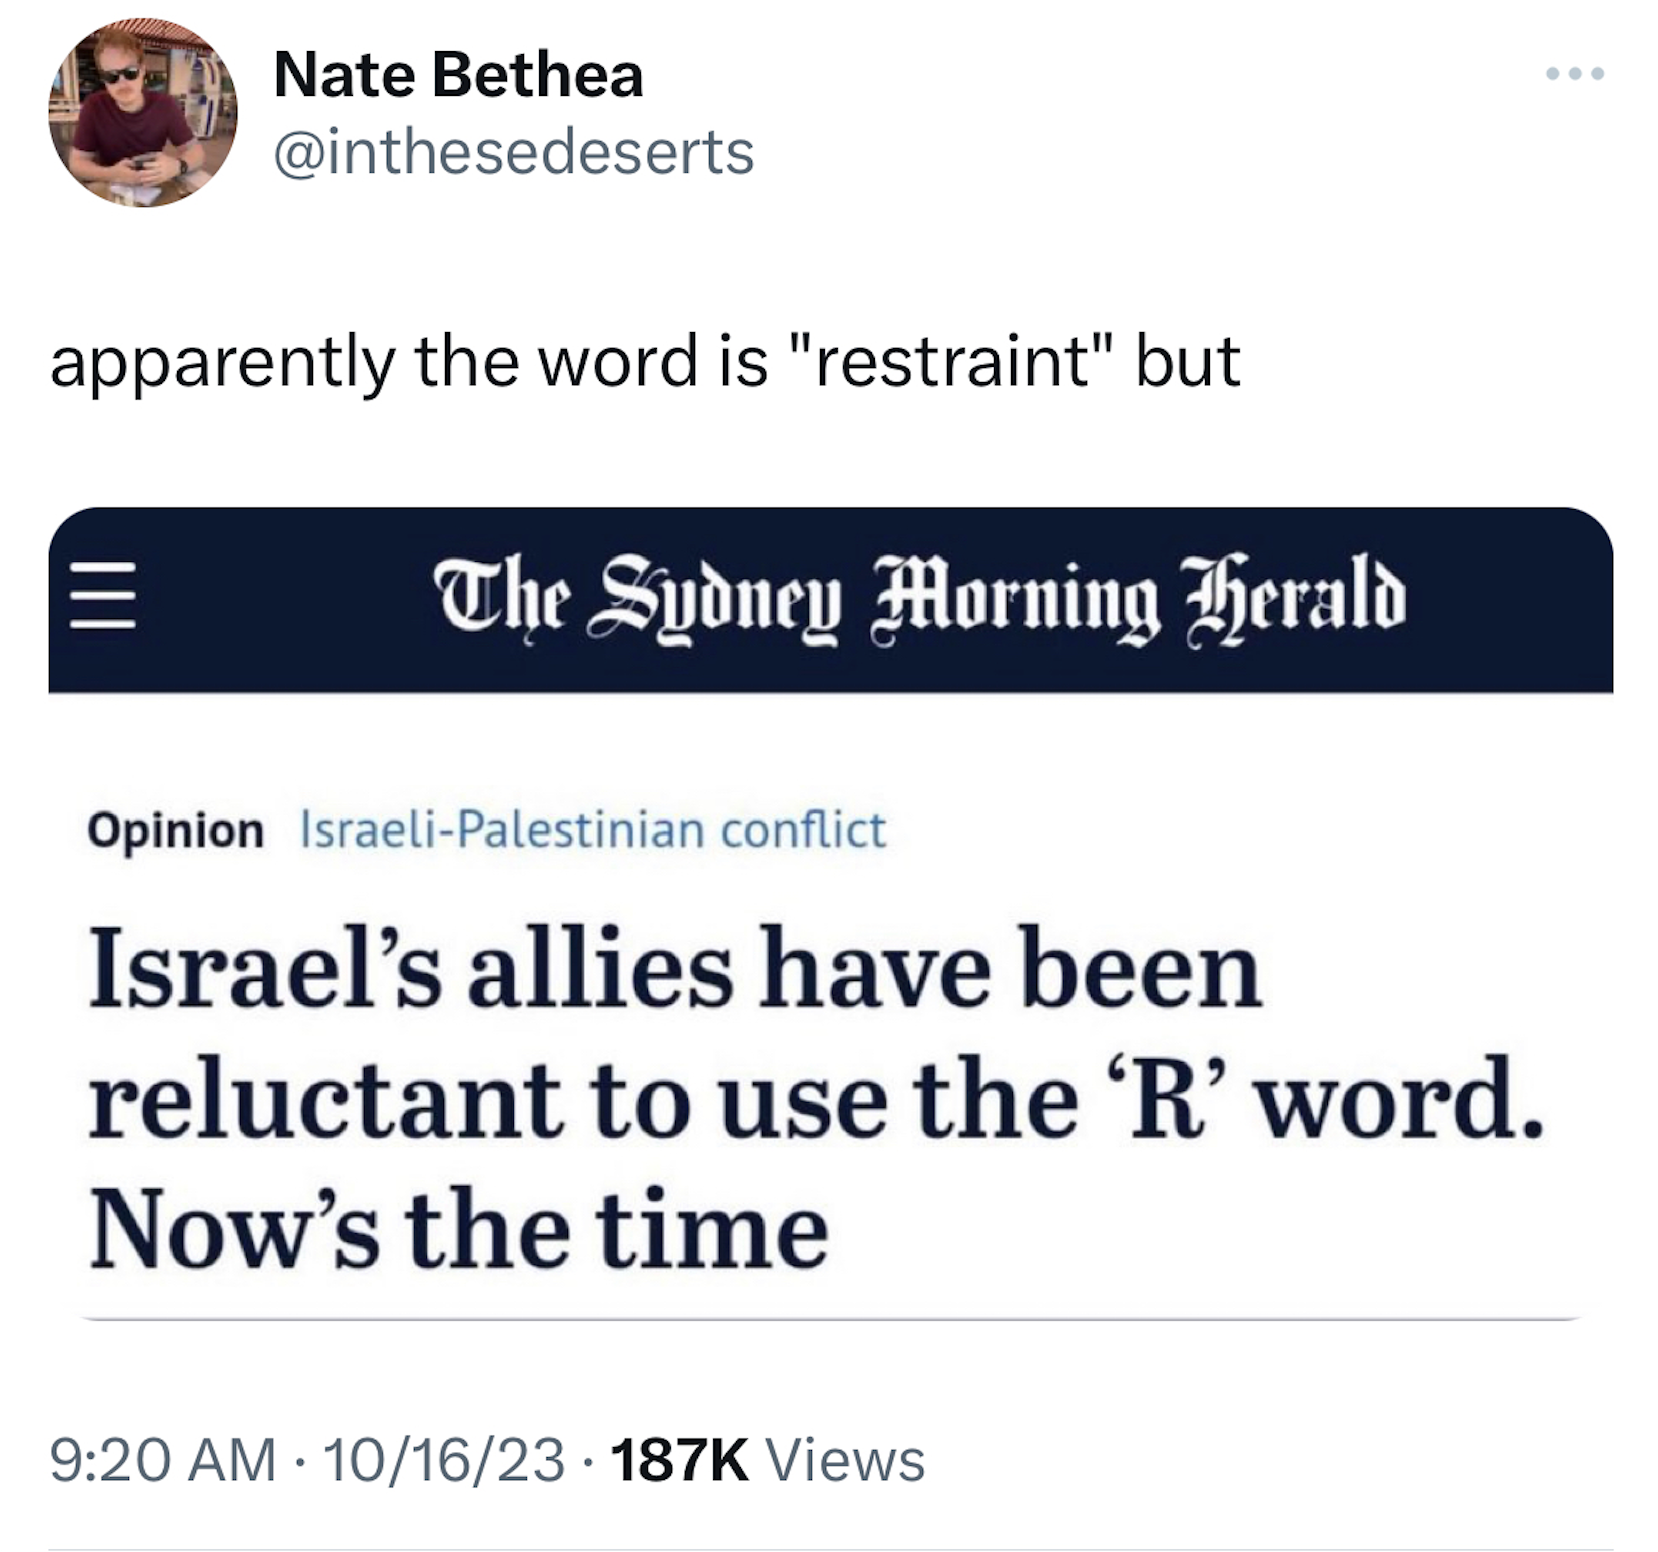 screenshot - Nate Bethea apparently the word is "restraint" but The Sydney Morning Herald Opinion IsraeliPalestinian conflict Israel's allies have been reluctant to use the 'R' word. Now's the time 1016 Views